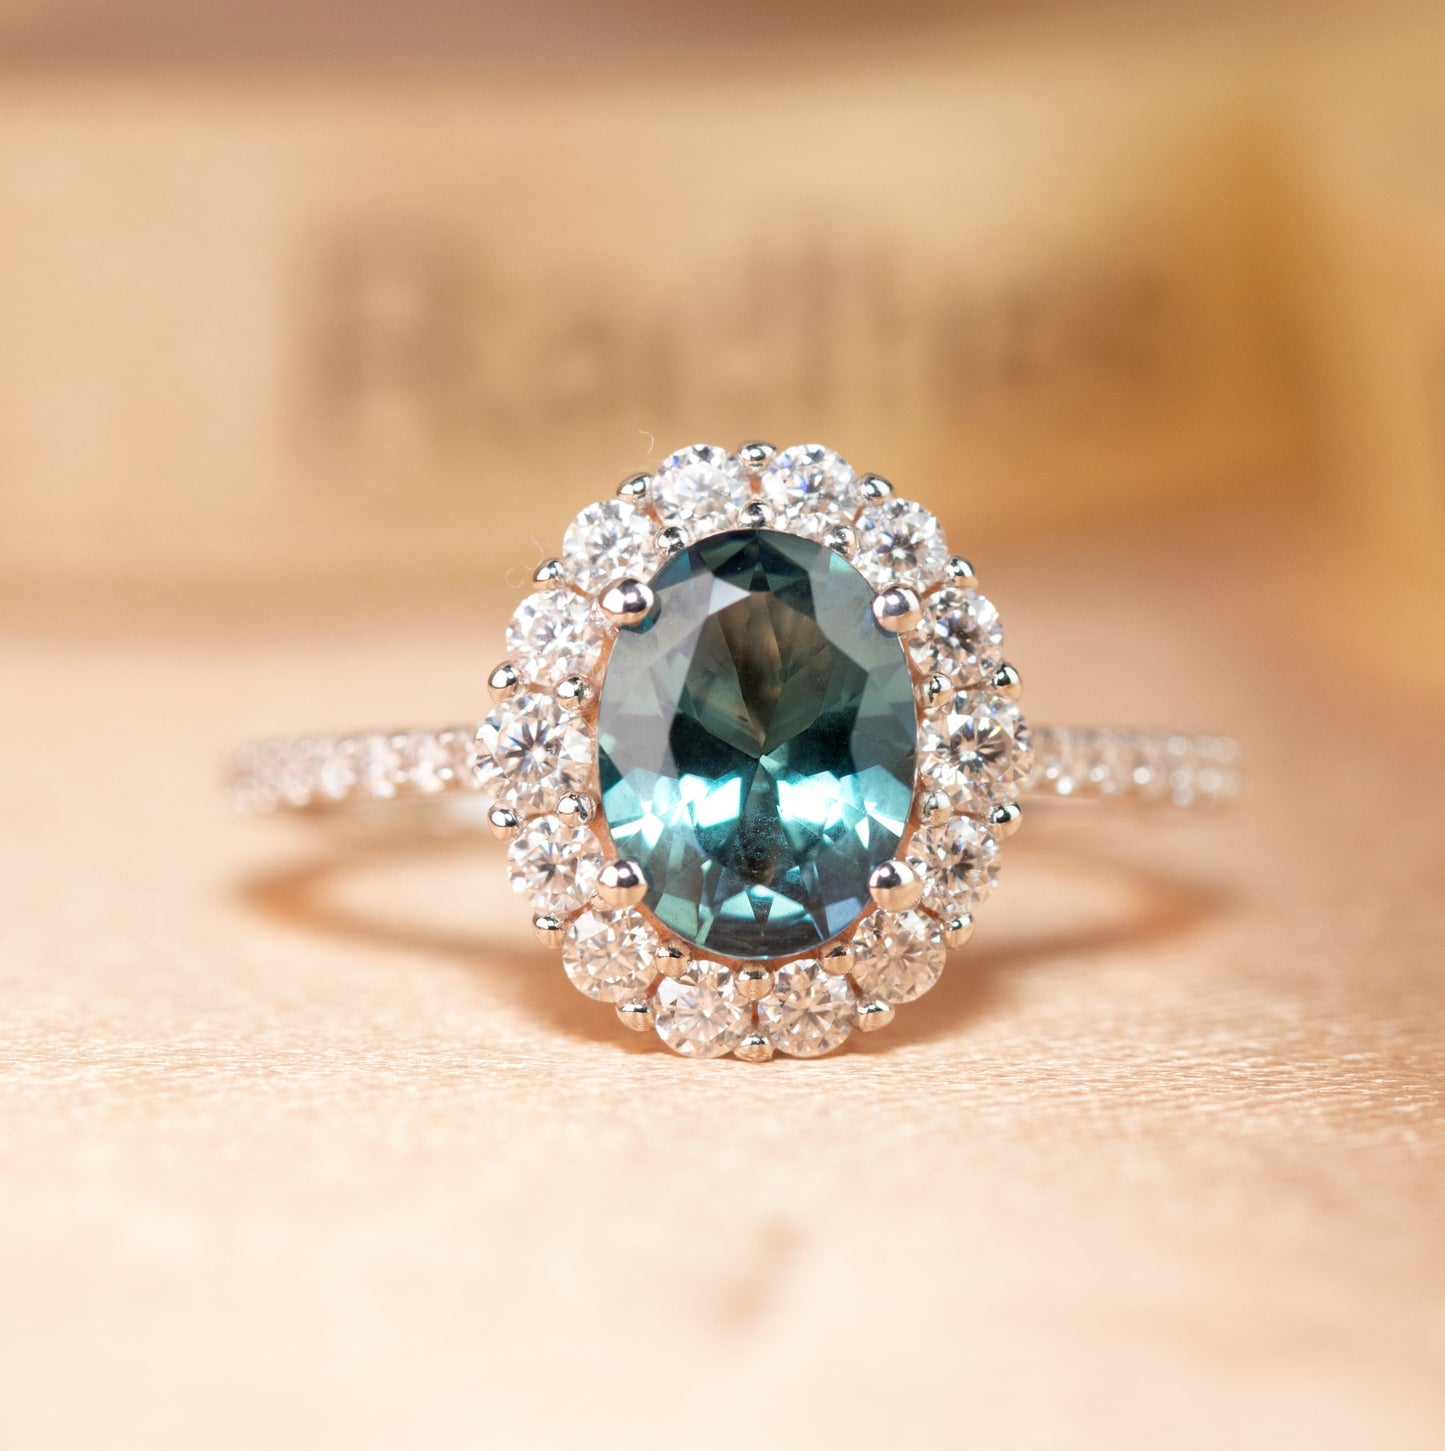 Luxurious 1.5 carat Oval Cut Alexandrite and Diamond Halo Flower Ring for Her in White Gold